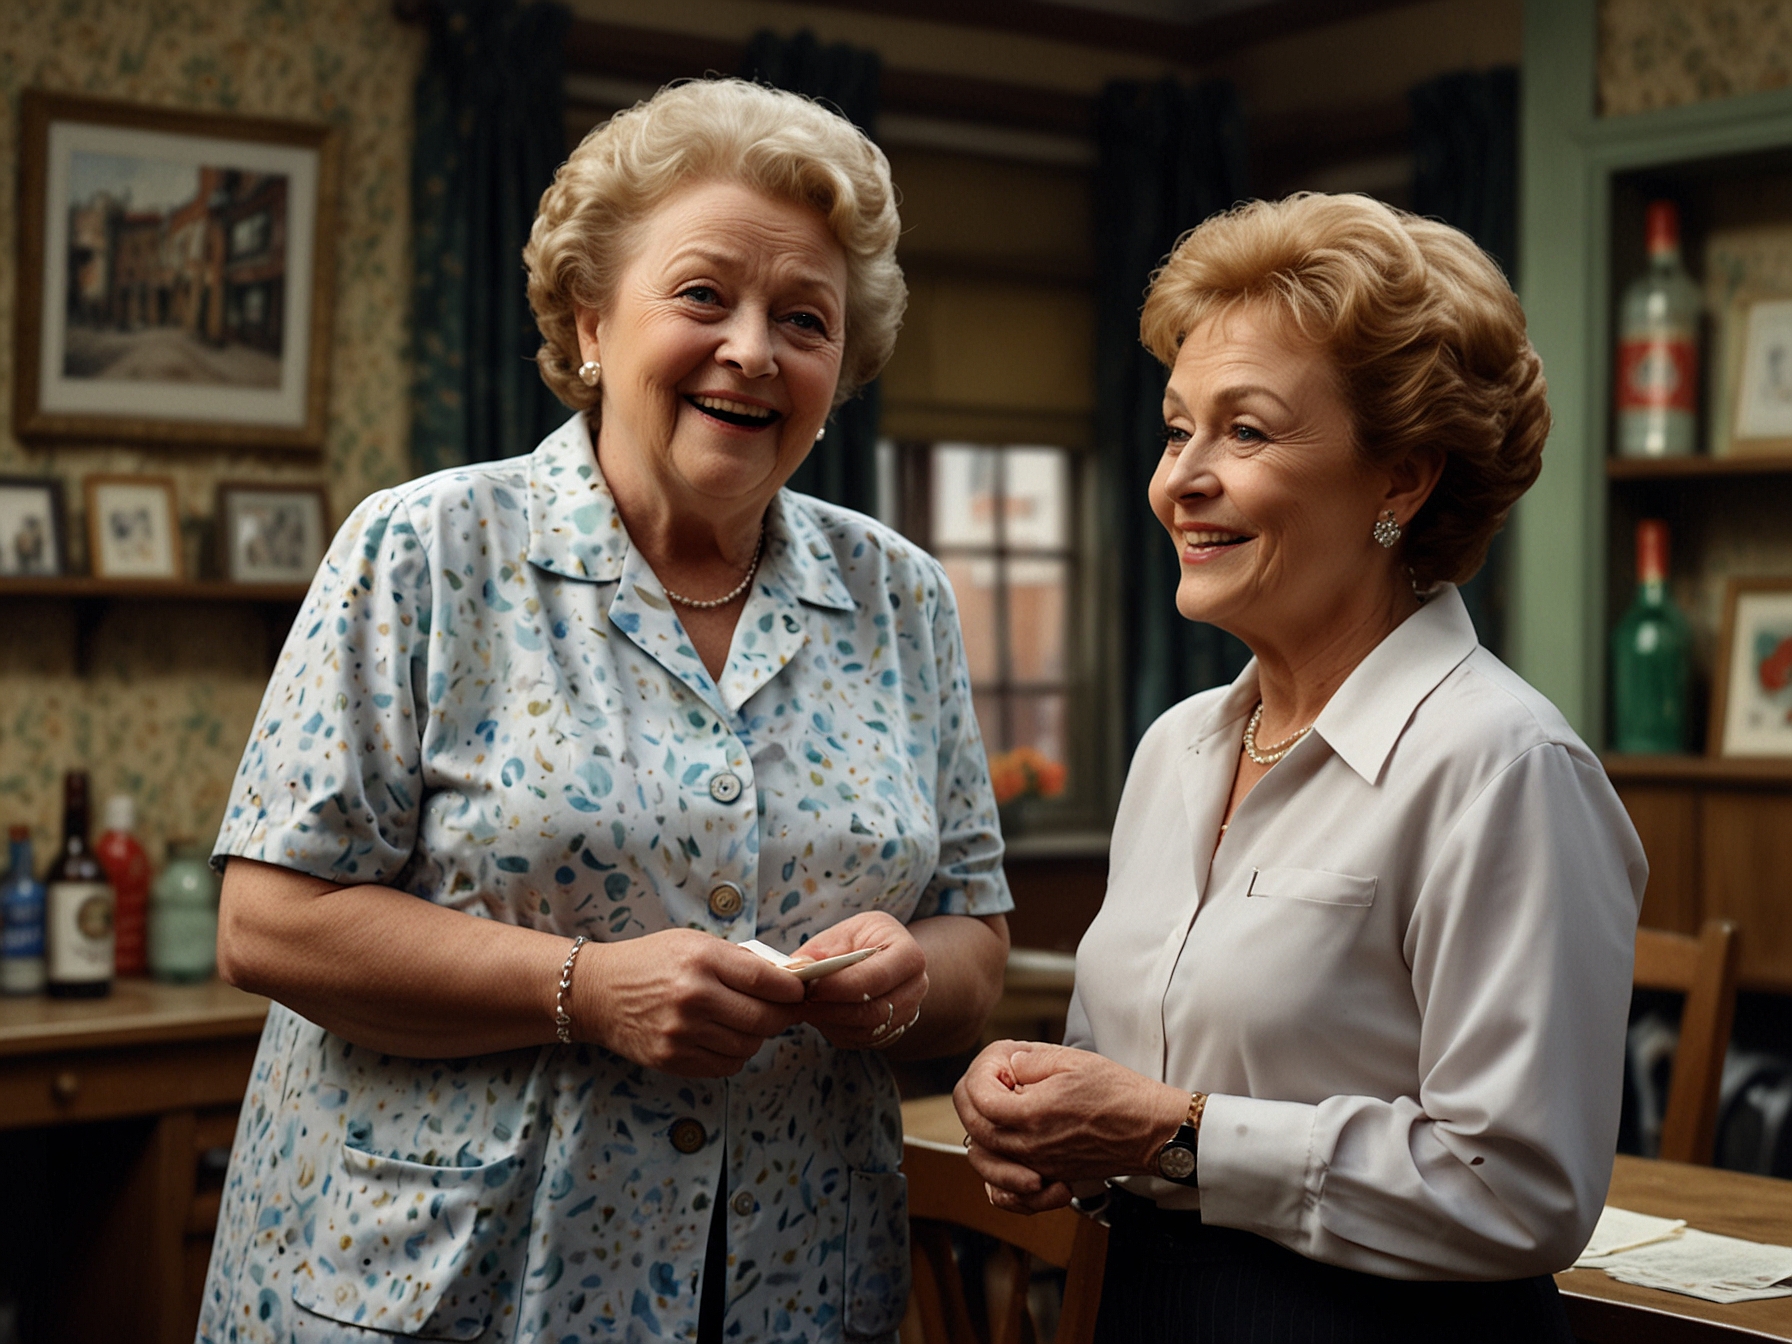 Thelma Barlow as Mavis Wilton on the set of Coronation Street, sharing a scene with Rita Sullivan. The two characters' chemistry was a highlight for fans of the long-running soap opera.